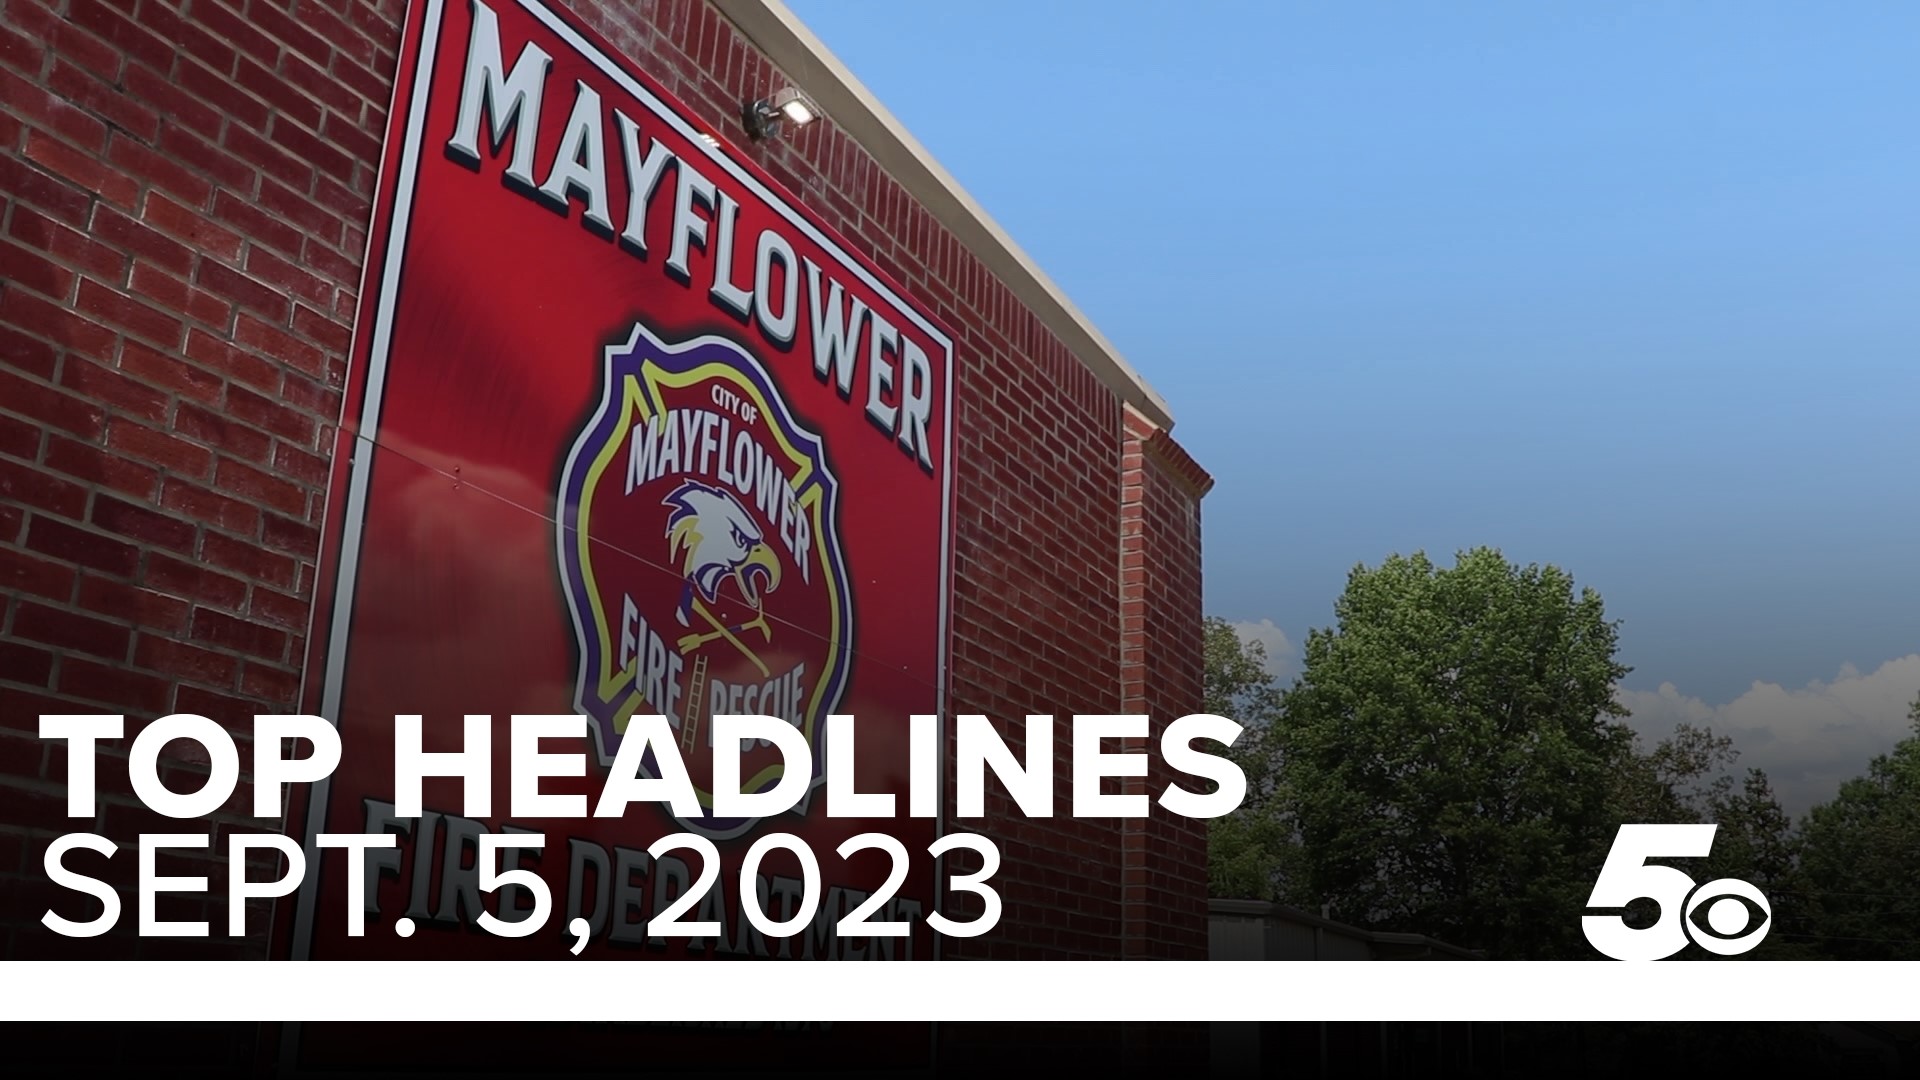 Top headlines for Northwest Arkansas and the River Valley for September 5, 2023.